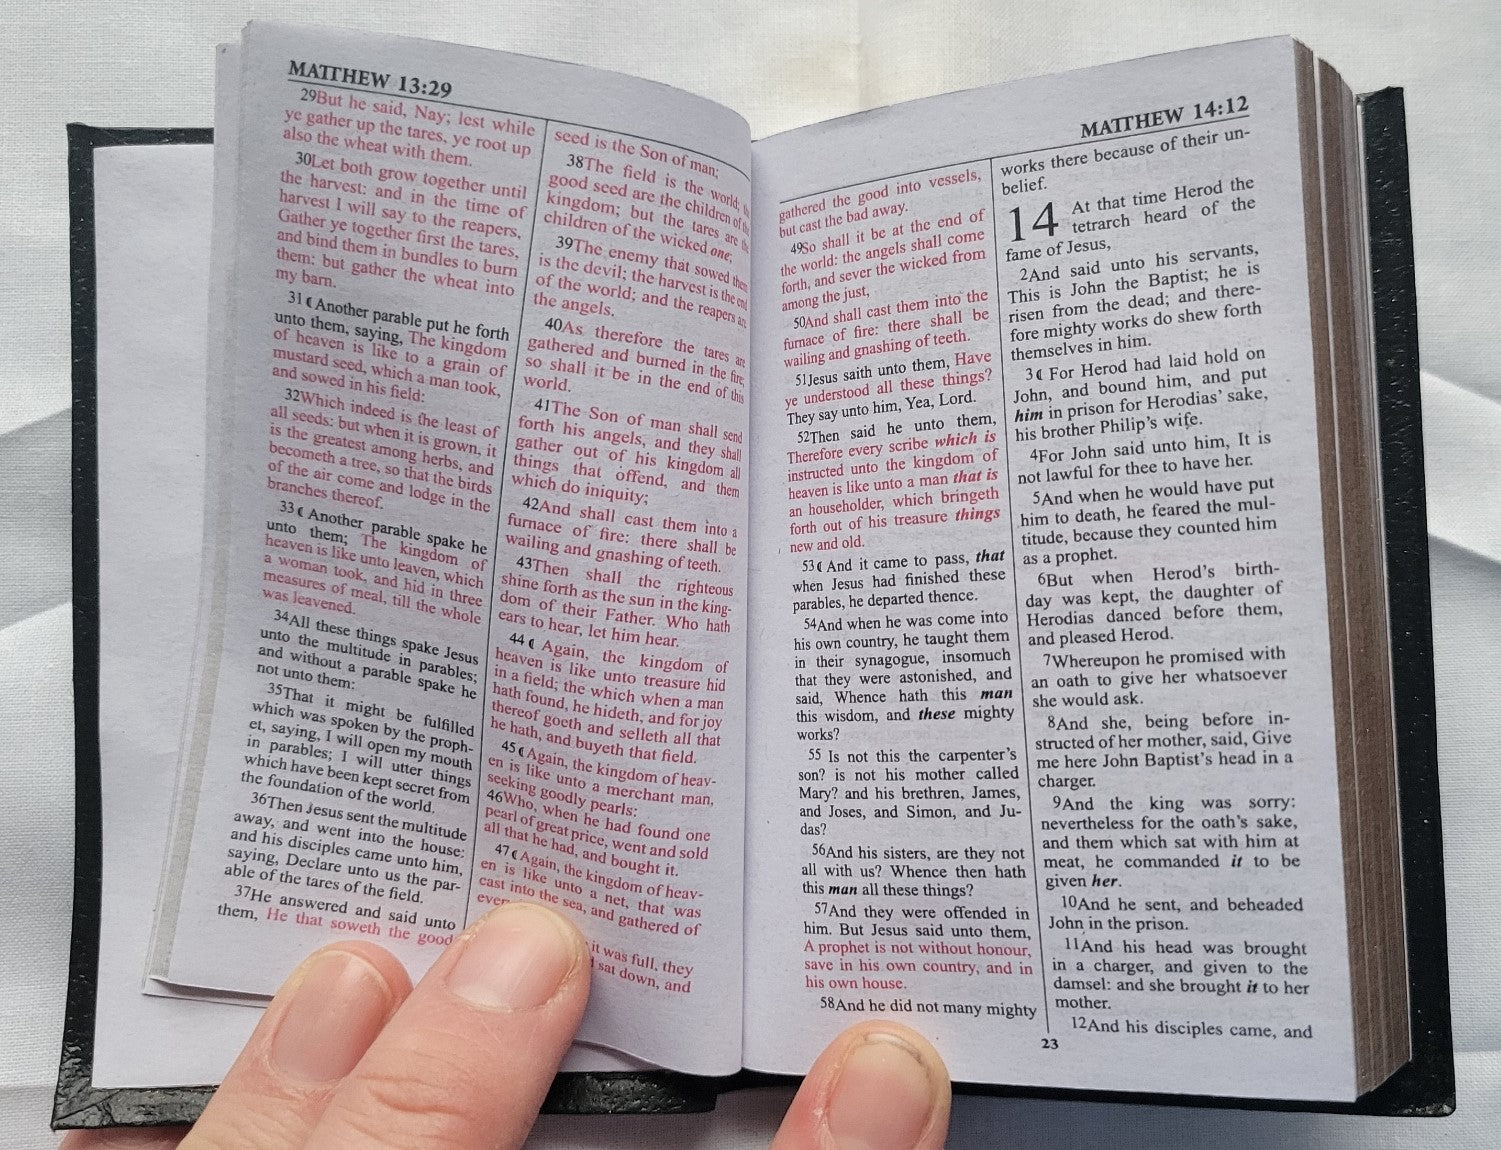 Used book for sale, Pocket size, red letter, King James Version New Testament. View of interior page.